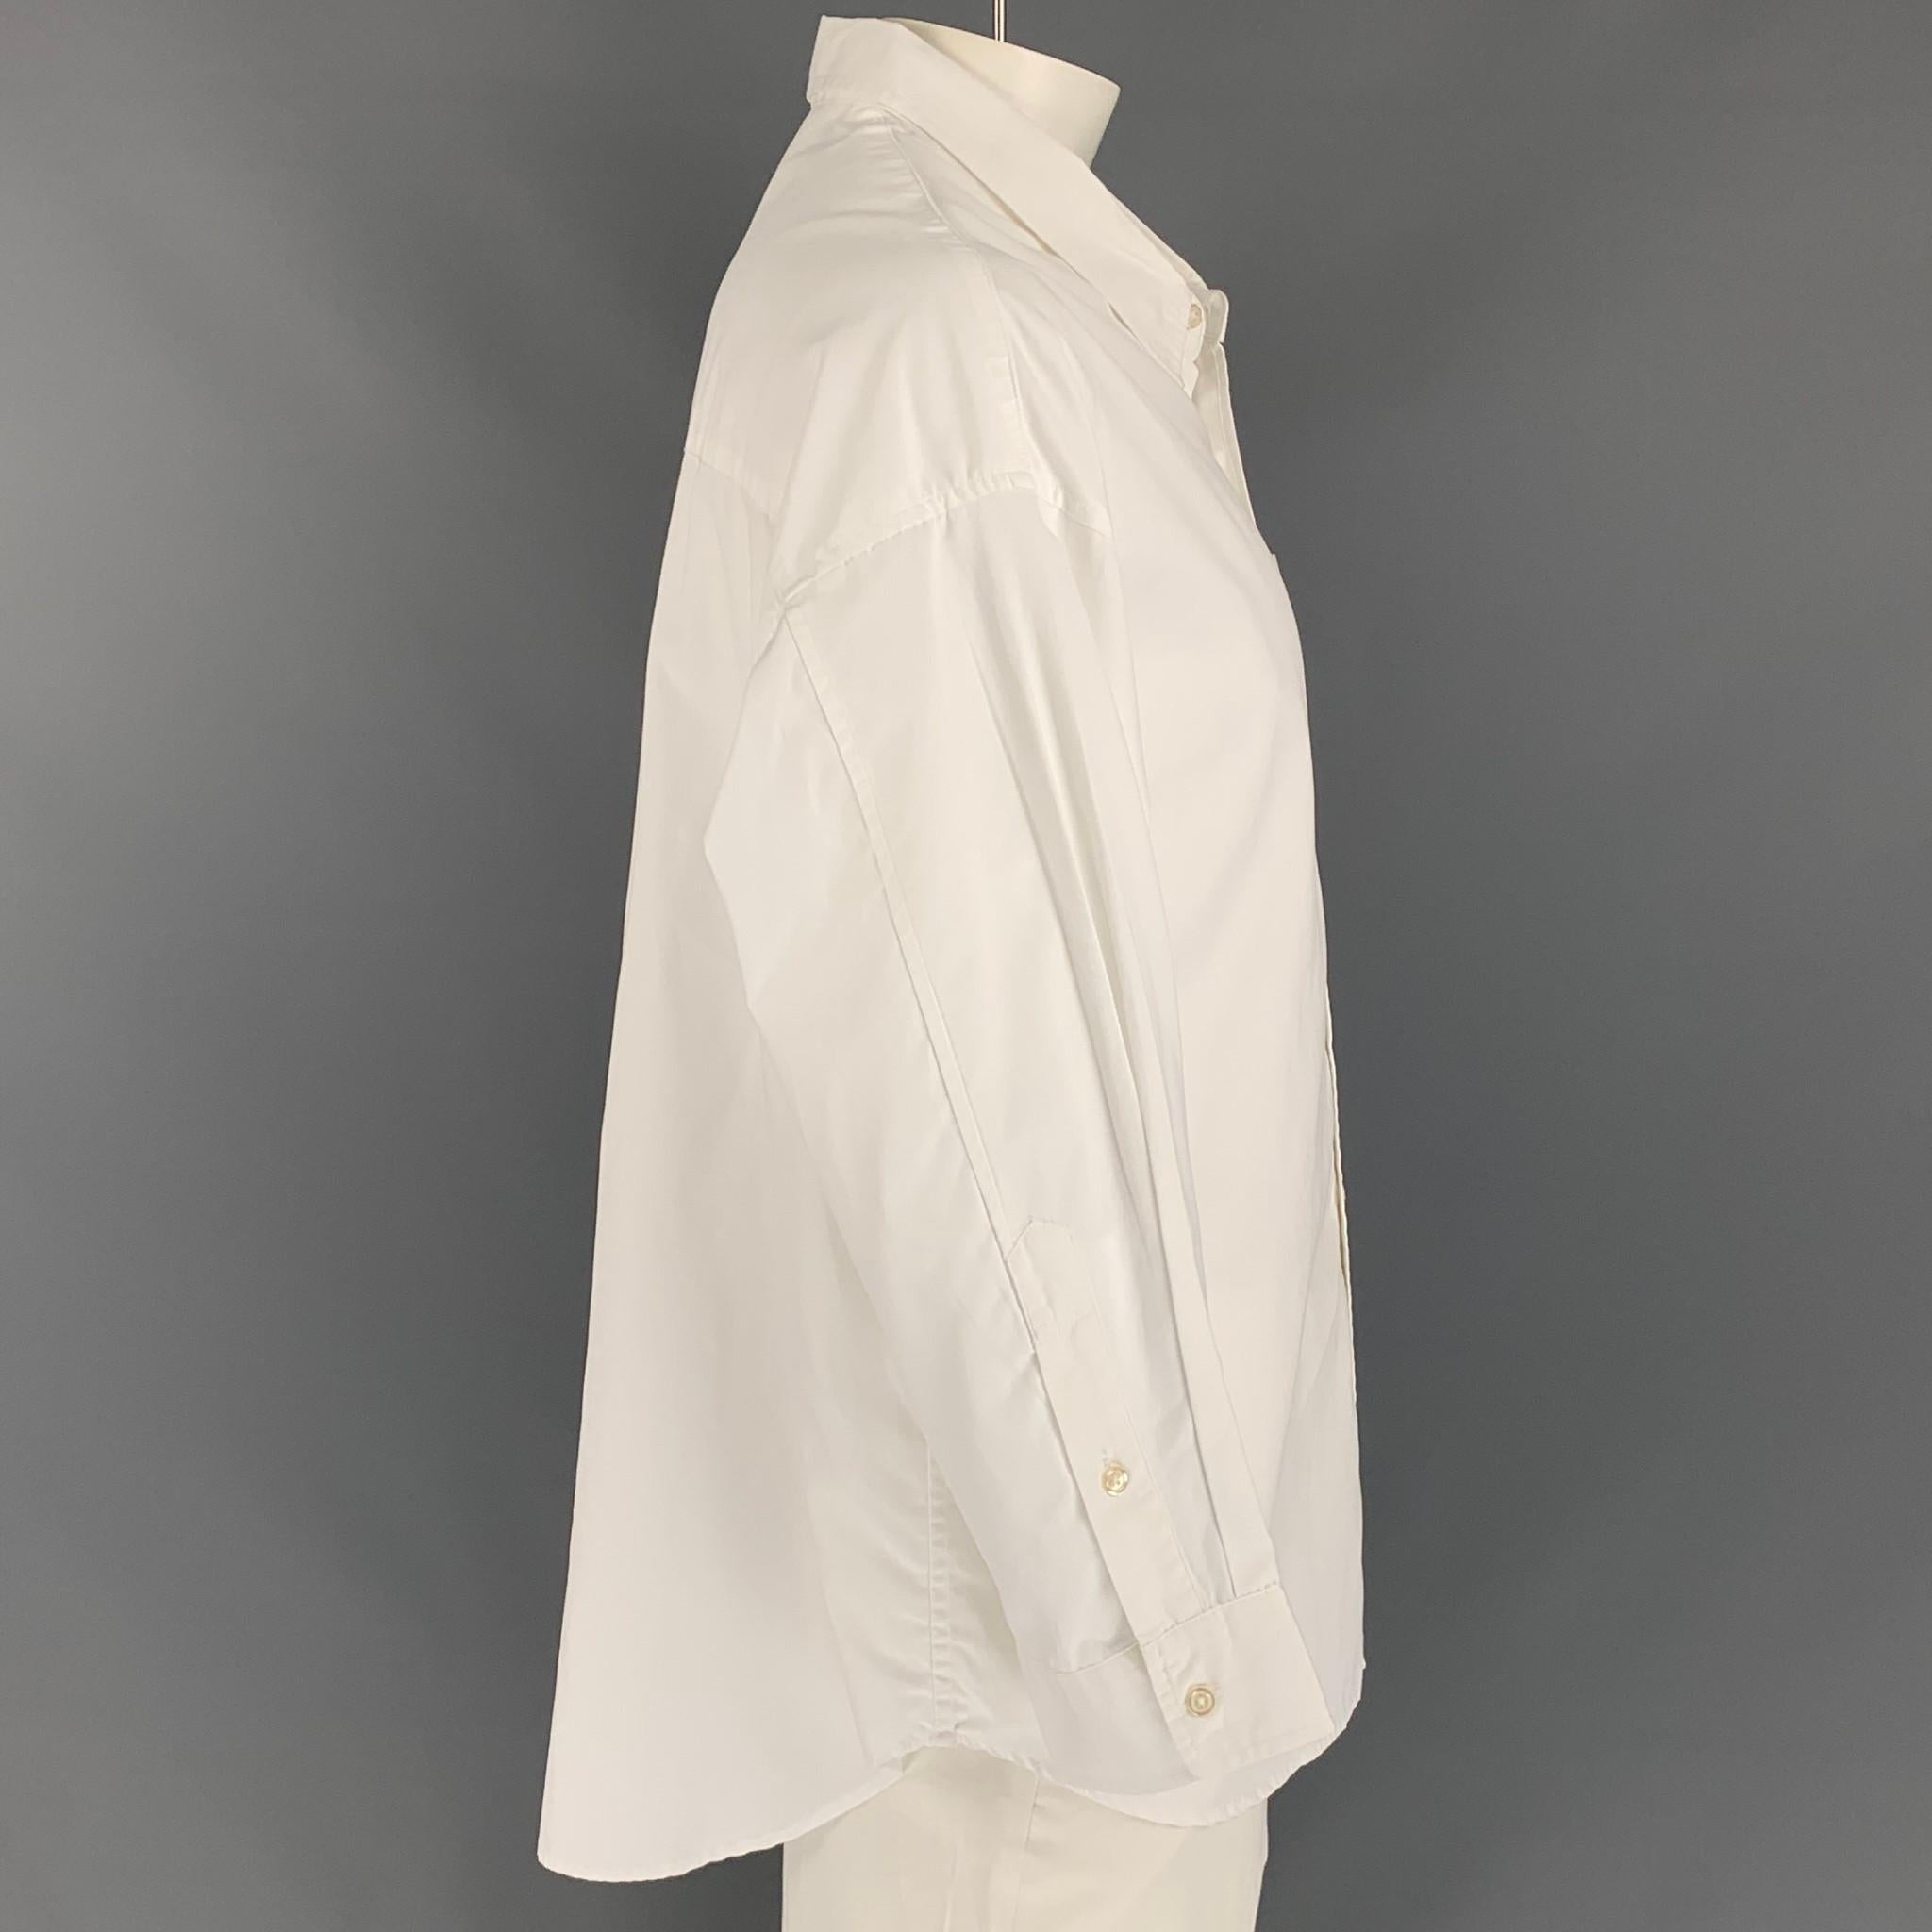 R13 long sleeve shirt comes in a white cotton featuring a oversized fit, spread collar, front pocket, and a buttoned closure.

Very Good Pre-Owned Condition.
Marked: XS

Measurements:

Shoulder: 25 in.
Chest: 48 in.
Sleeve: 20 in.
Length: 32 in. 